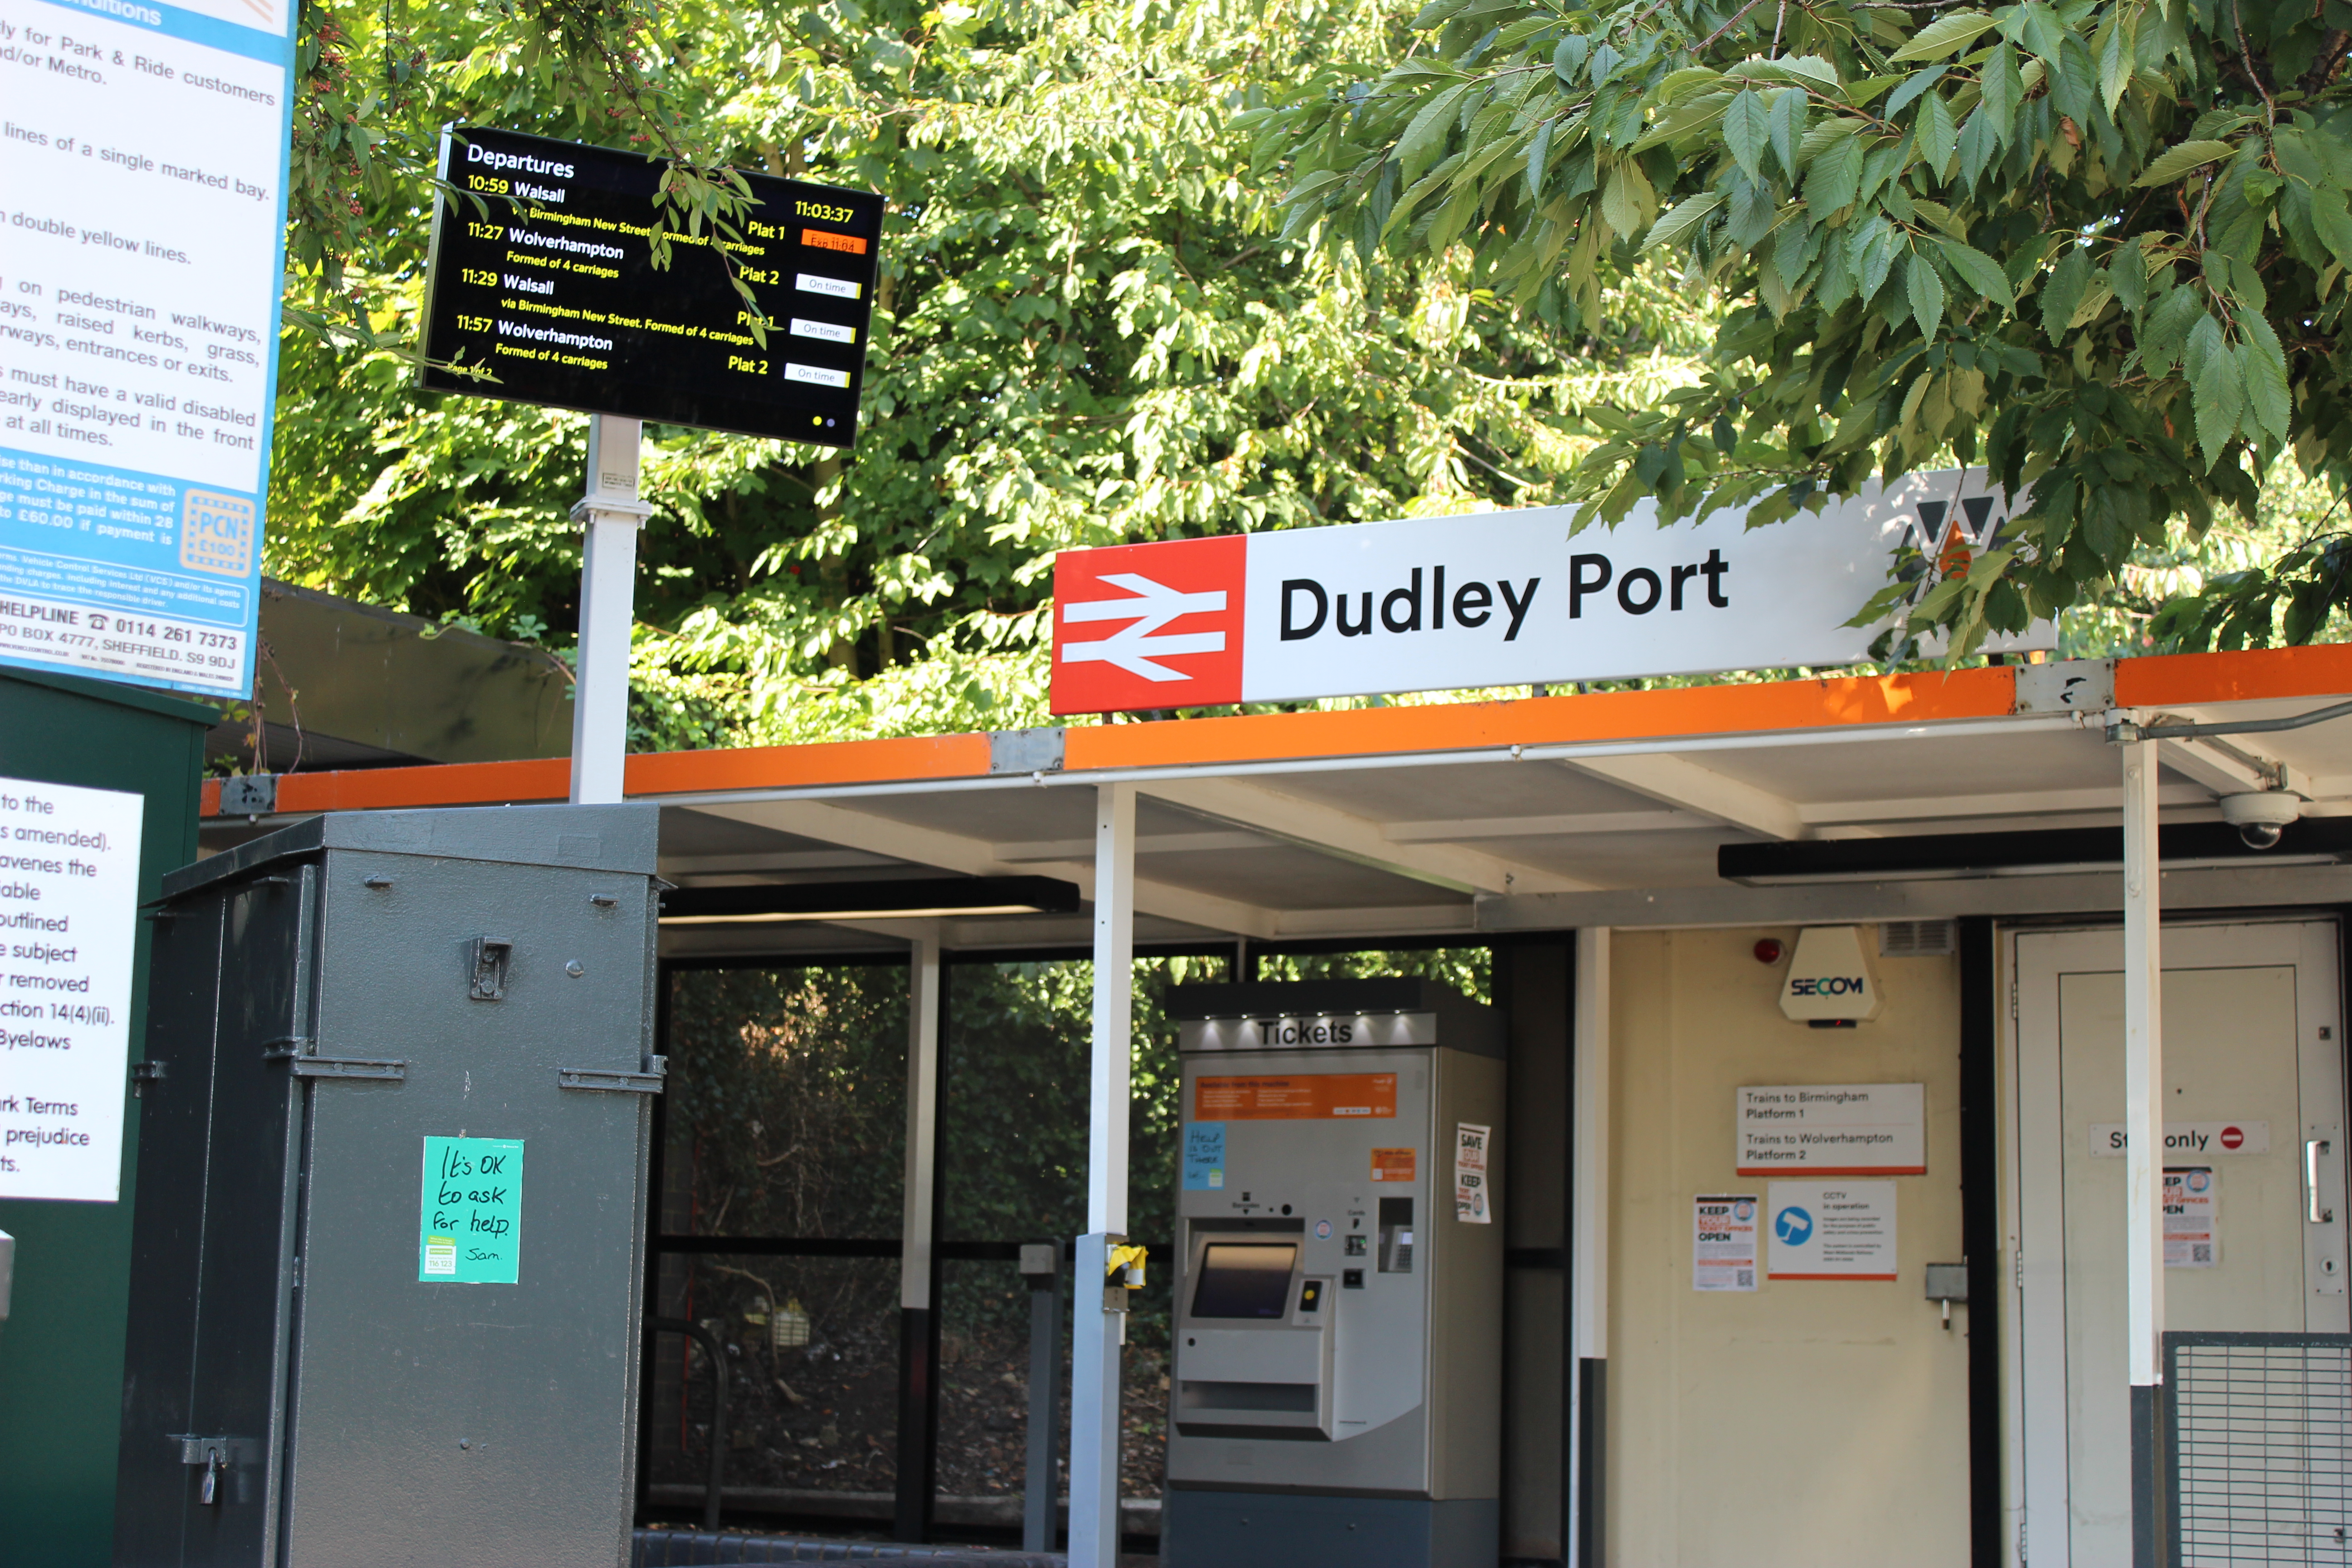 Entrance to Dudley Port Railway Station